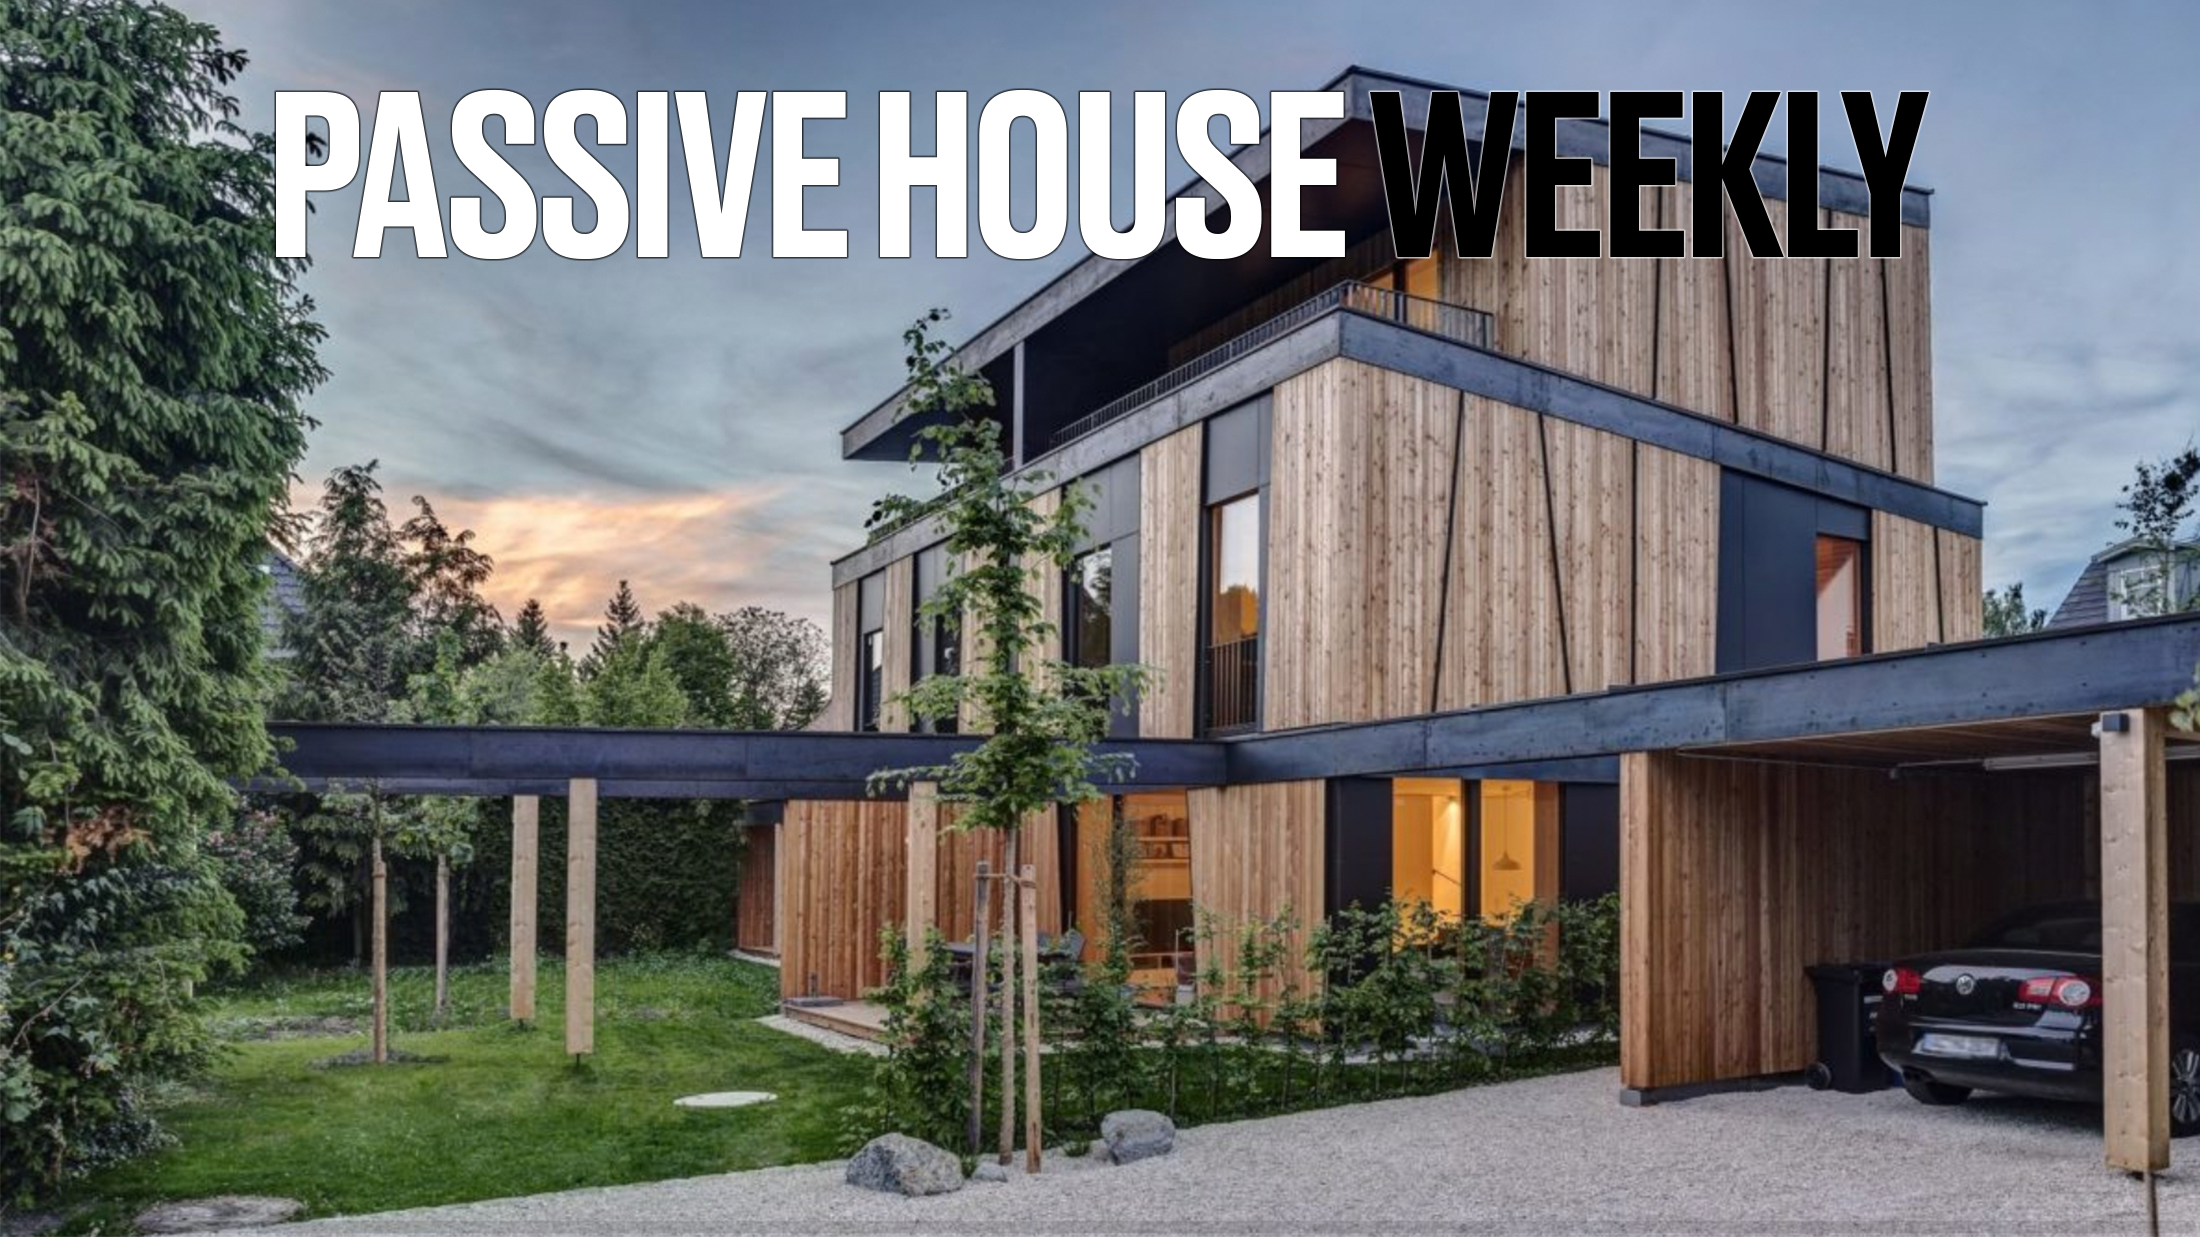 Passive House Weekly: April 25, 2022